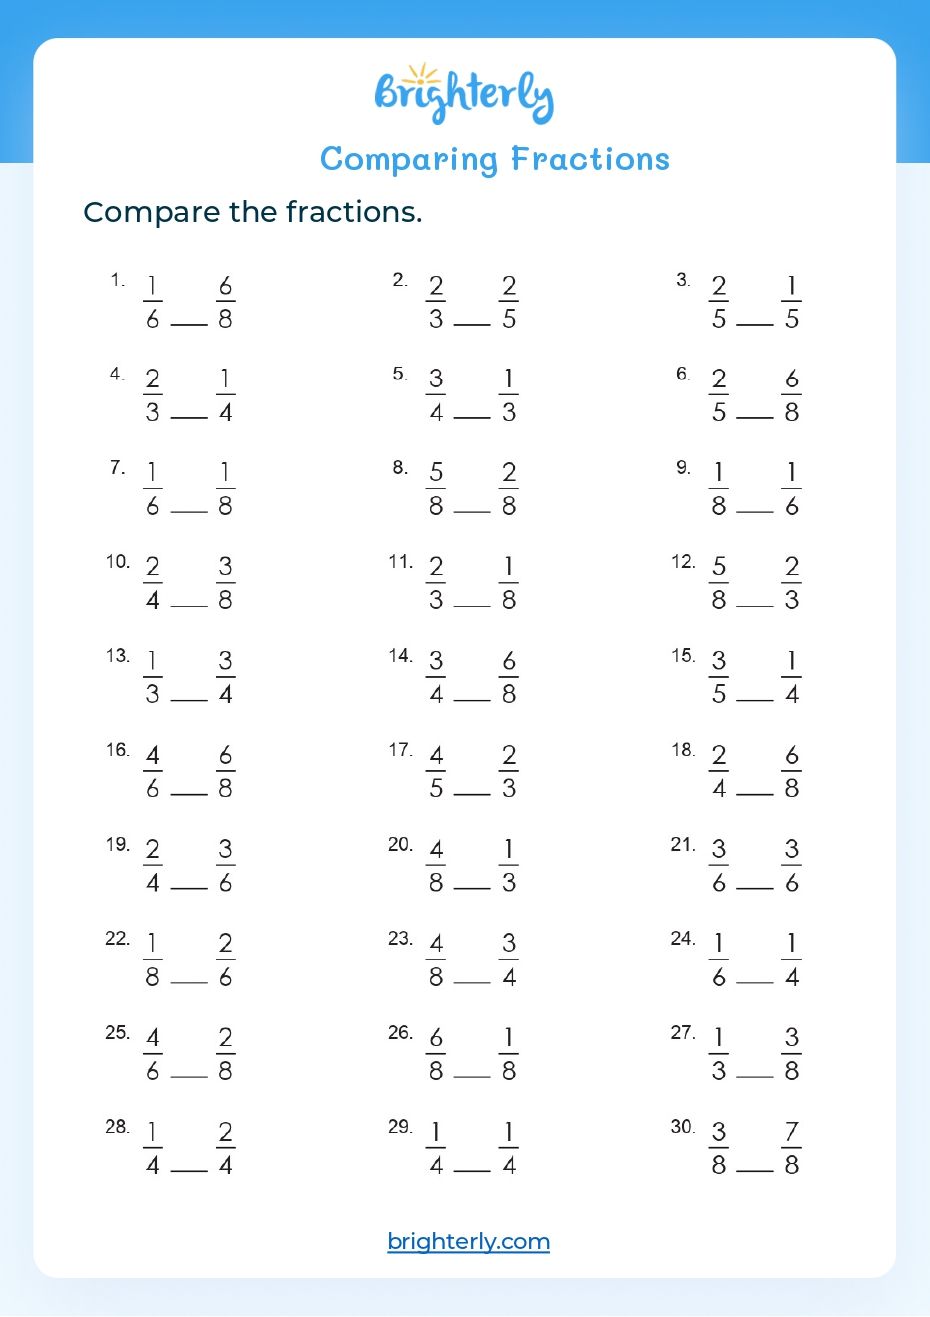 Free Printable Comparing Fractions Worksheet 4th Grade Brighterly com